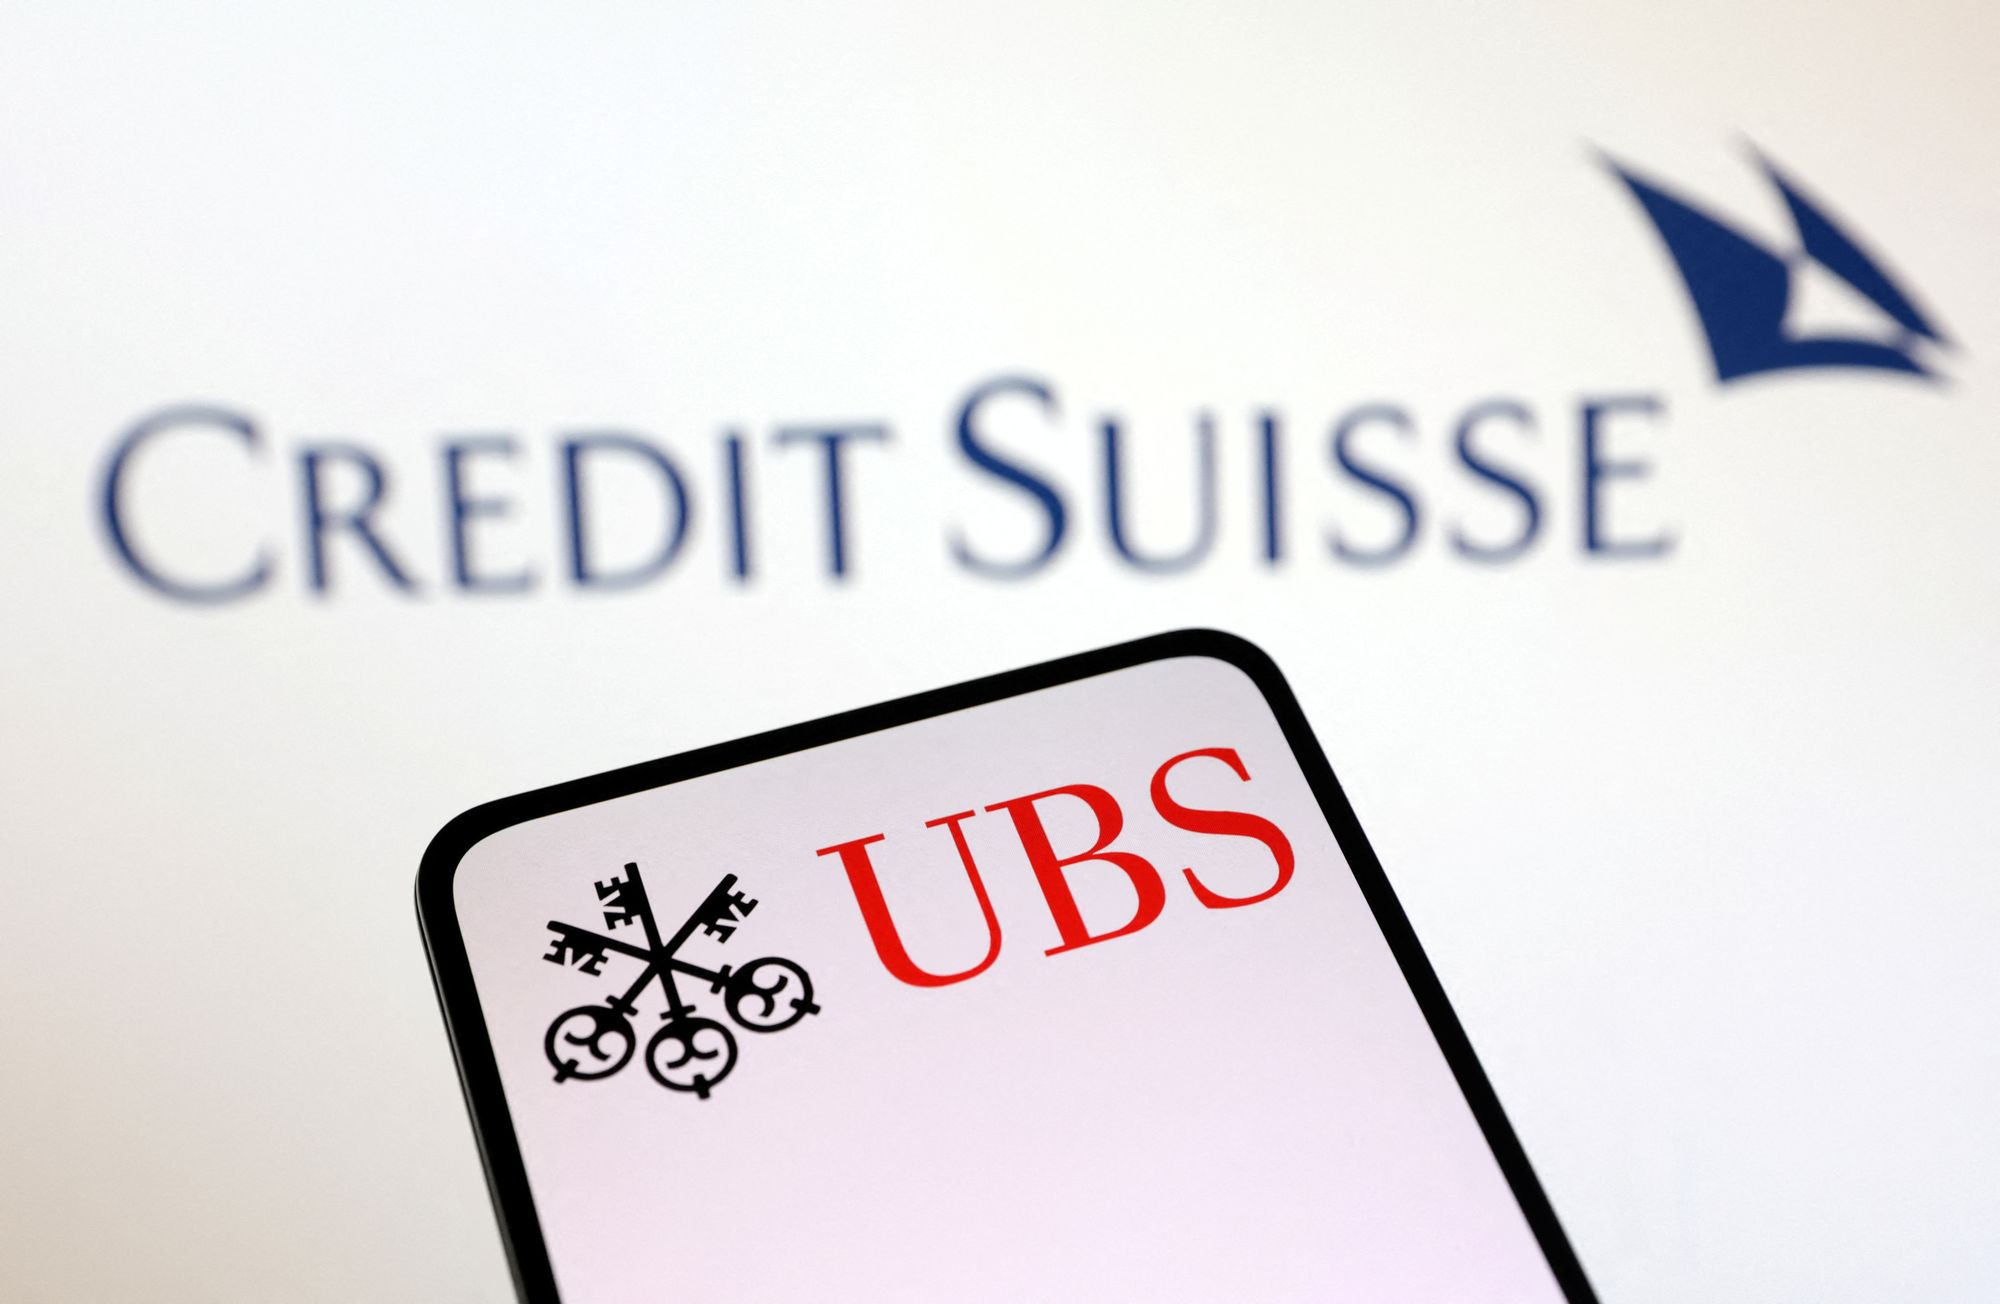 UBS Group and Credit Suisse